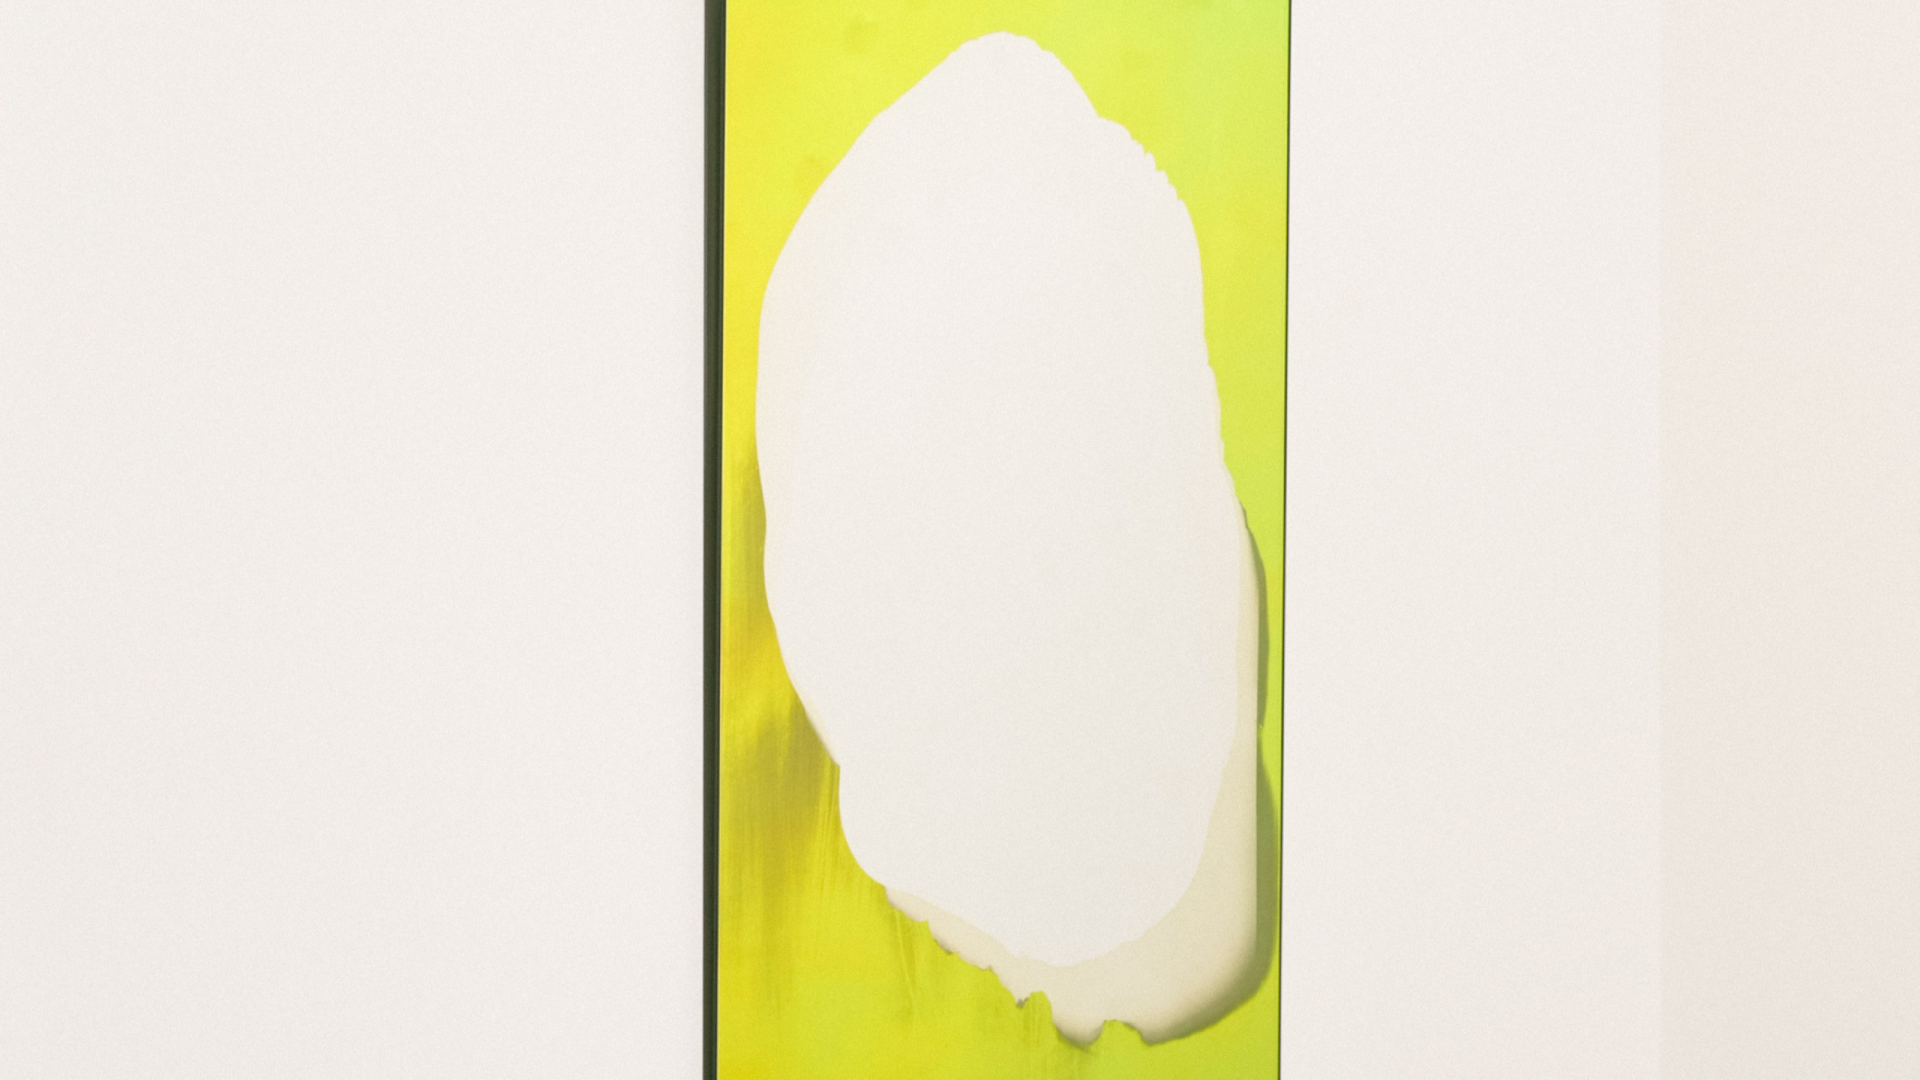 A 'puddle mirror' from Cordon Salon's Volume III exhibition